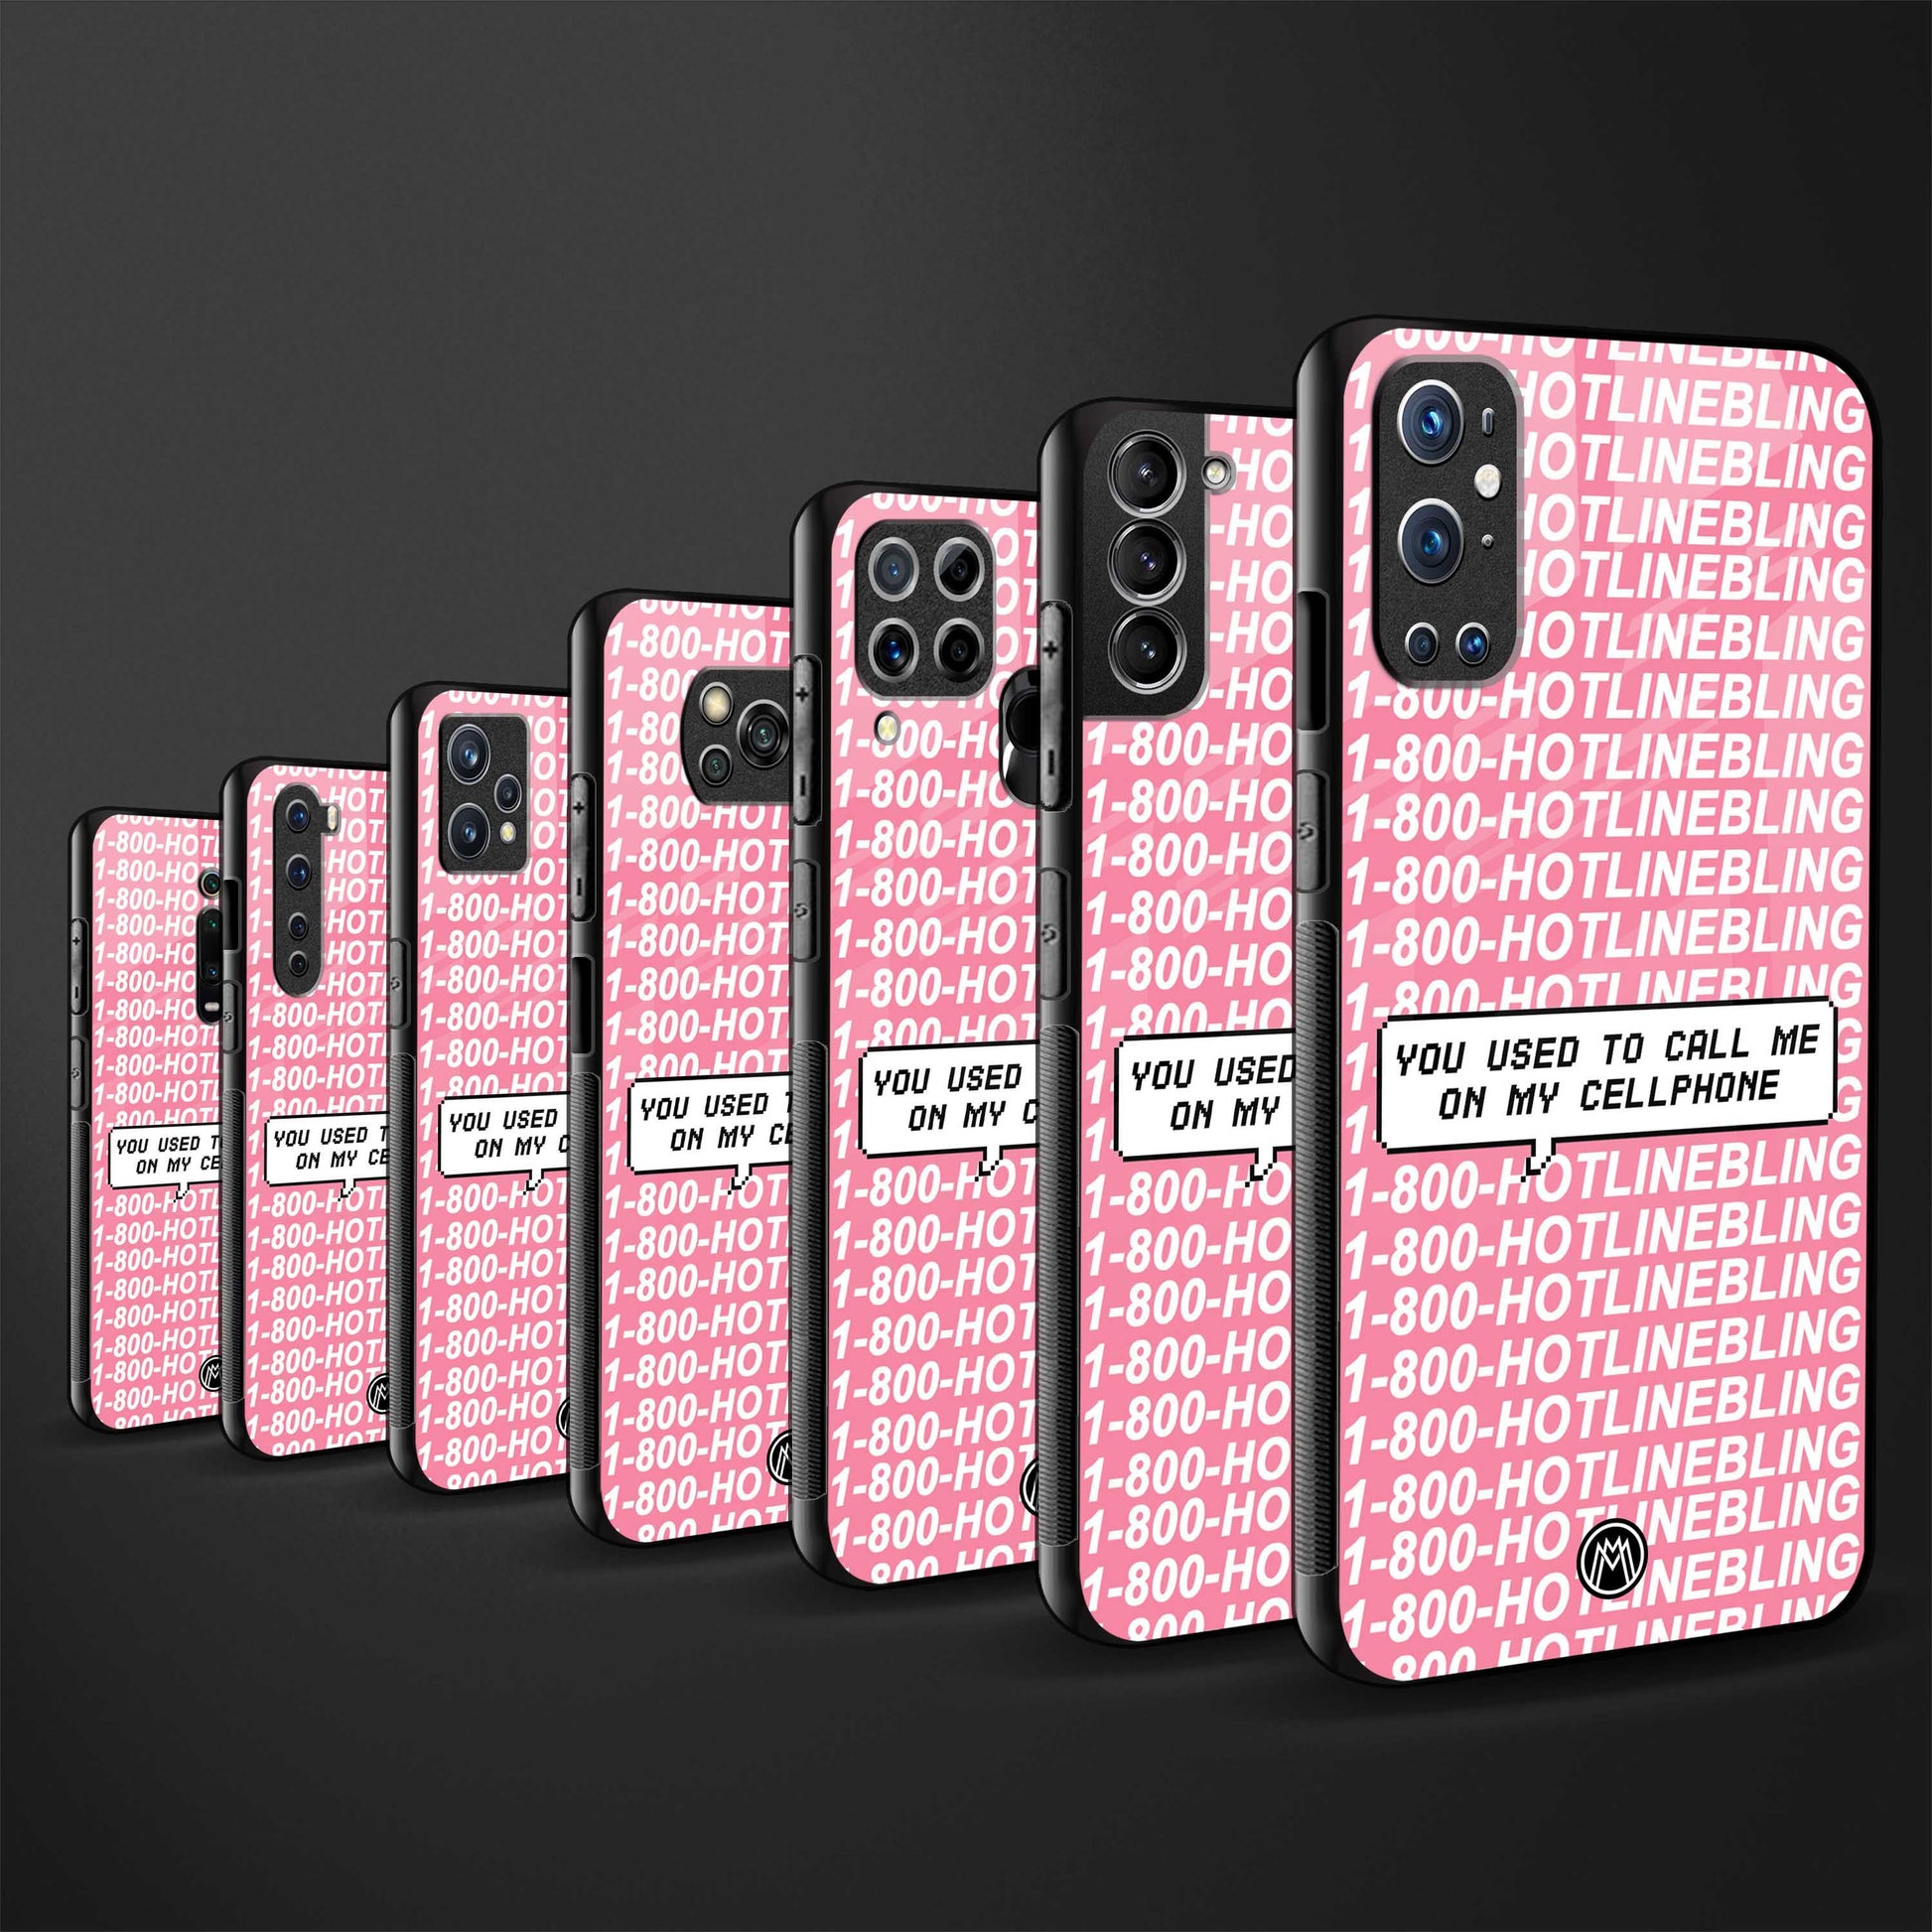 1800 hotline bling phone cover for samsung galaxy a70s 